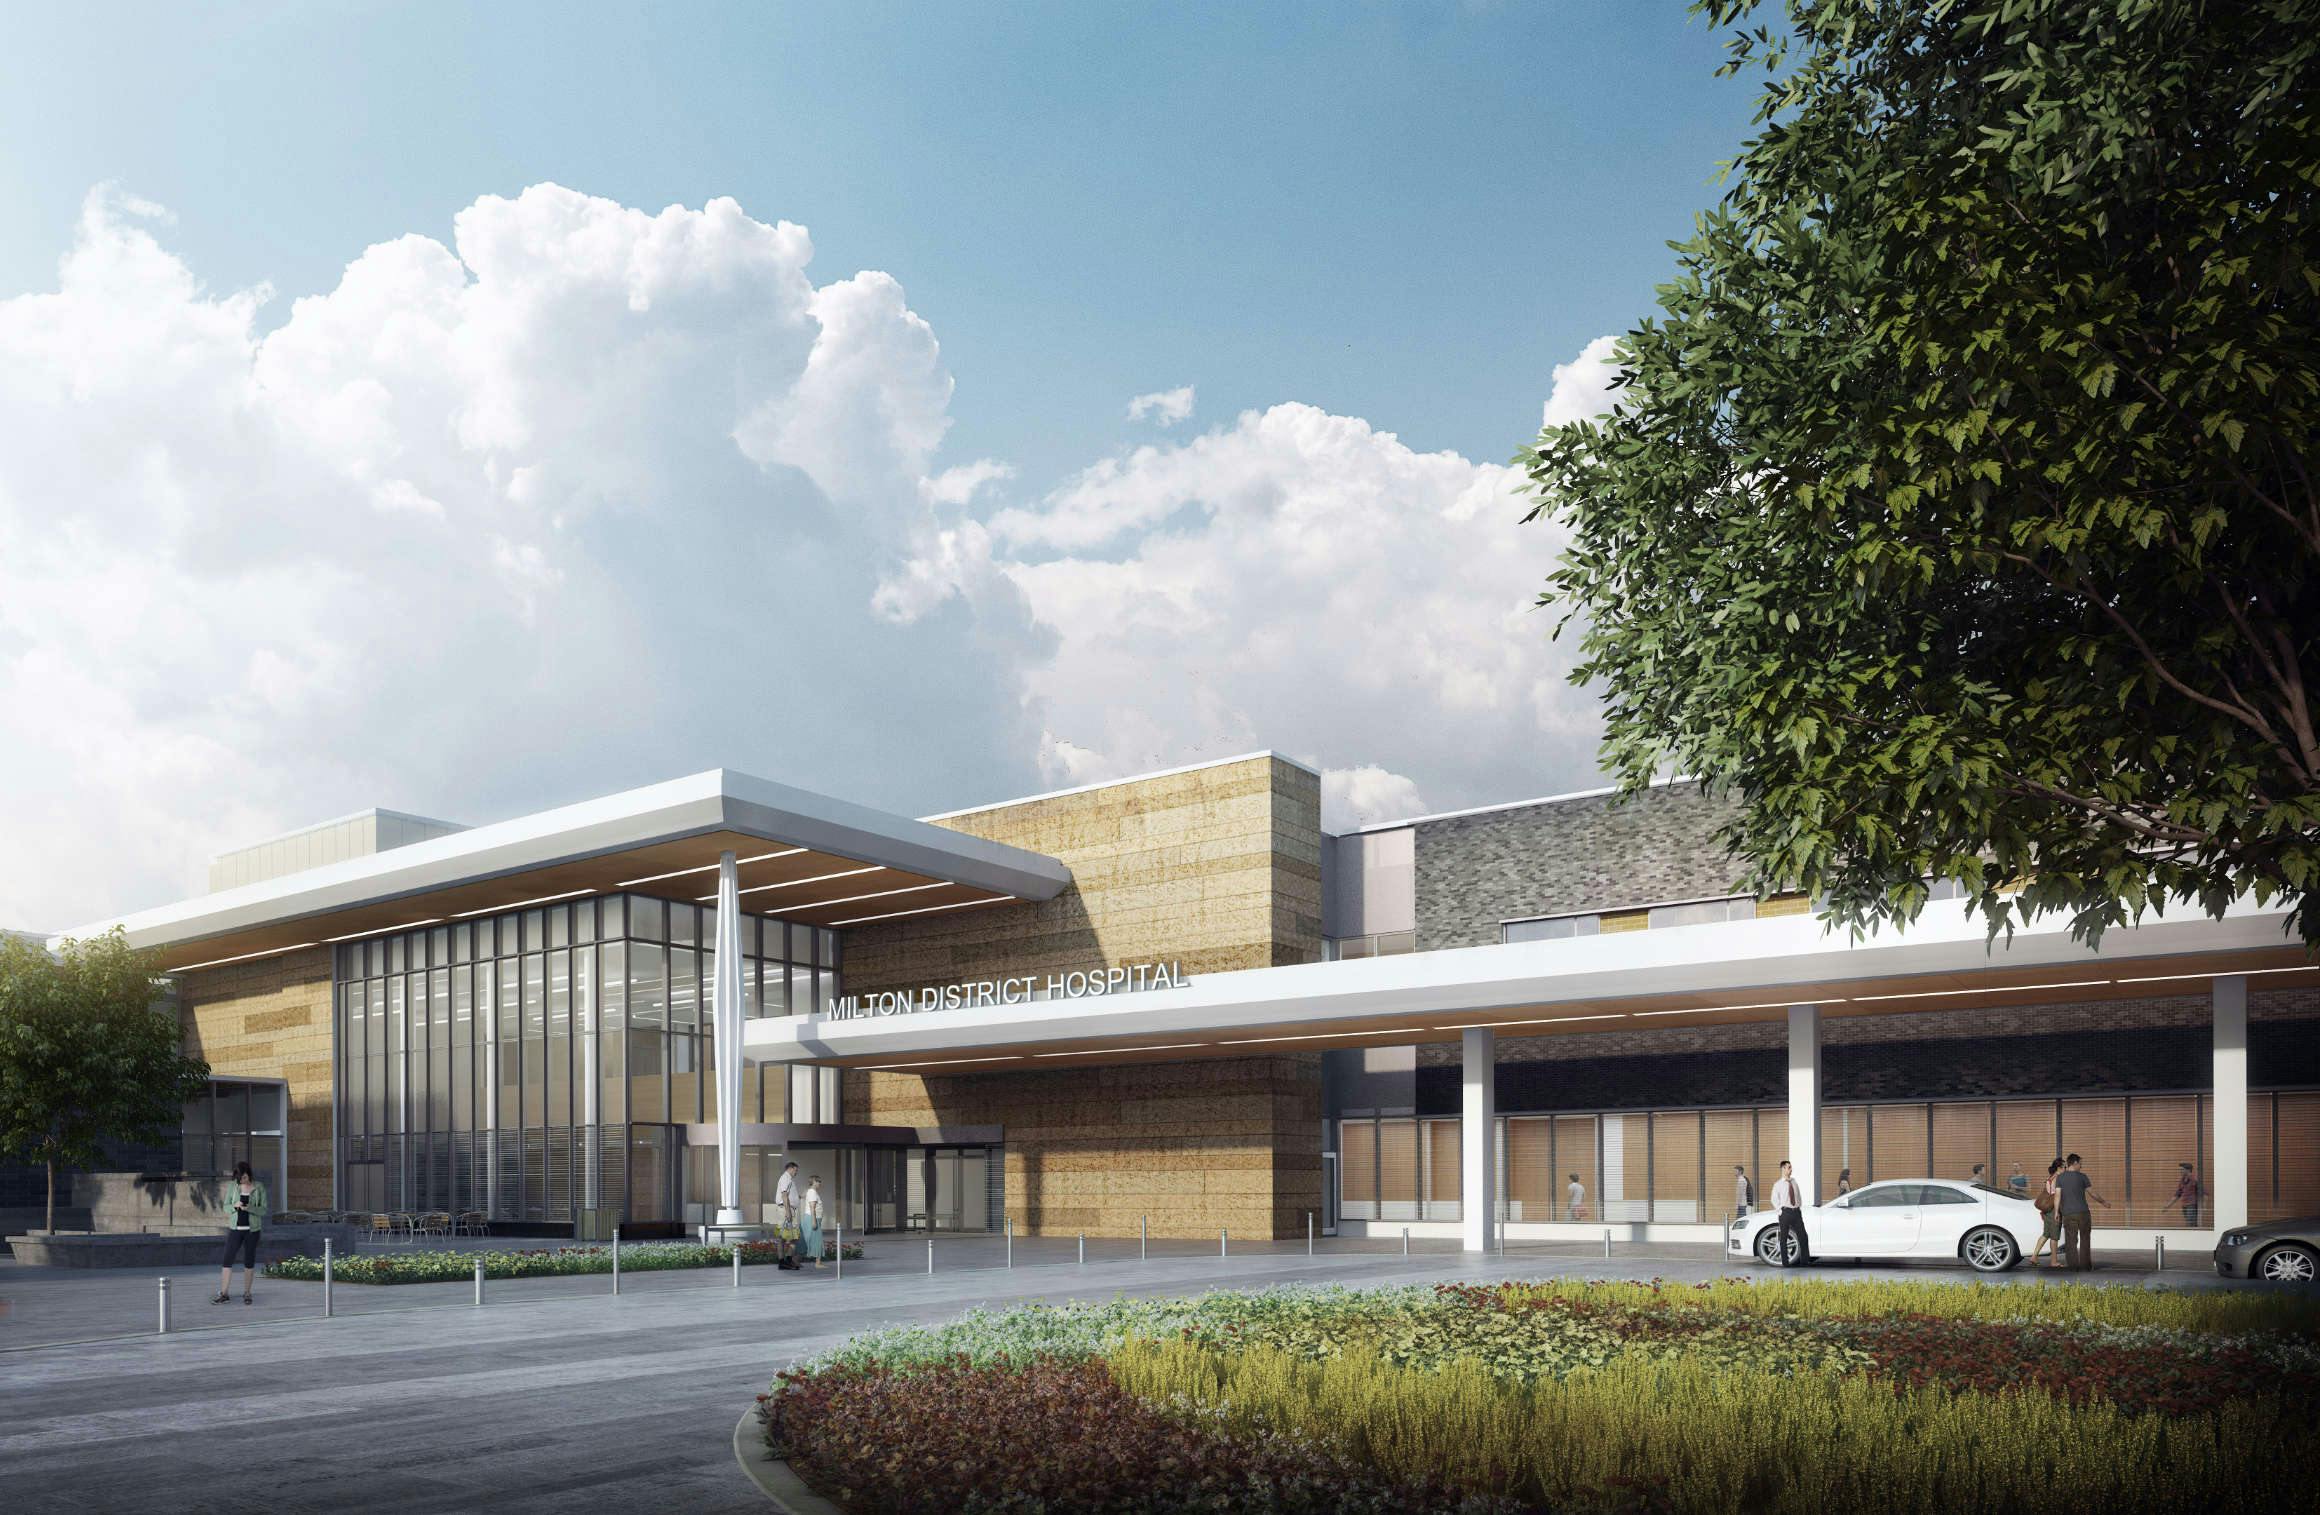 Plenary achieves substantial completion on Milton District Hospital image